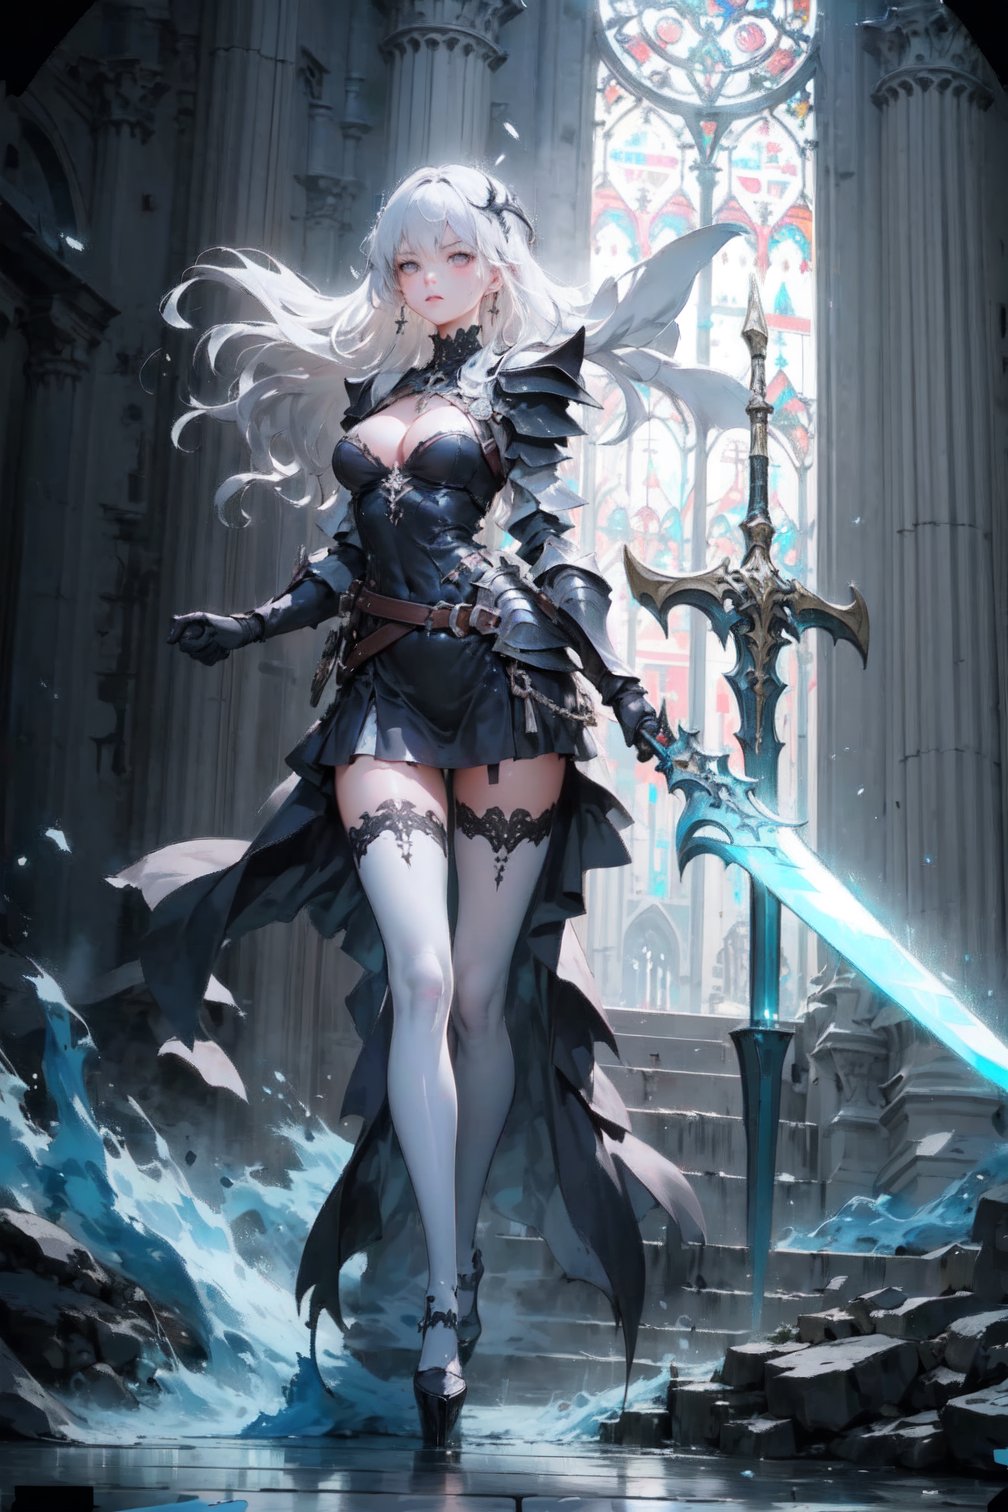 Anigame, vivid, raw, uhd, 8k, hires, 1girl, solo, full_body, cleavage, long dress, very_long_hair, 21years old, levitating, dash jumping, (floating in the air)), sharp image, ((black_full_armor)), (((pointing with blade with two hands towards alter))), ((glowing blade)), lava, soul, demon, death, knight, fights monsters, bright_light, dark_light, action side view, active, queen, supernatural, beauty, sexy, random background, neon lights, (fit in the frame)dynamic_angle, large_breasts, dynamic_lighting, dynamic_action, cleavage, (dynamic pose), ((see_through)), string, minimal fabric ,clothes_tearing, dynamic effects, water, magic, thigh_gap, slim_body, slim_thigh, sorcerer ,Anigame ,pastelbg, legs_open, detailed_face, impossible_fit, fit_in_frame, full_body, sfw, facing_viewer,side_view,highres,More Detail, UHD,High detailed ,Color Booster,realistic,girl, pastelbg, beautiful_background, ((in the holy cathedral)),perfect light